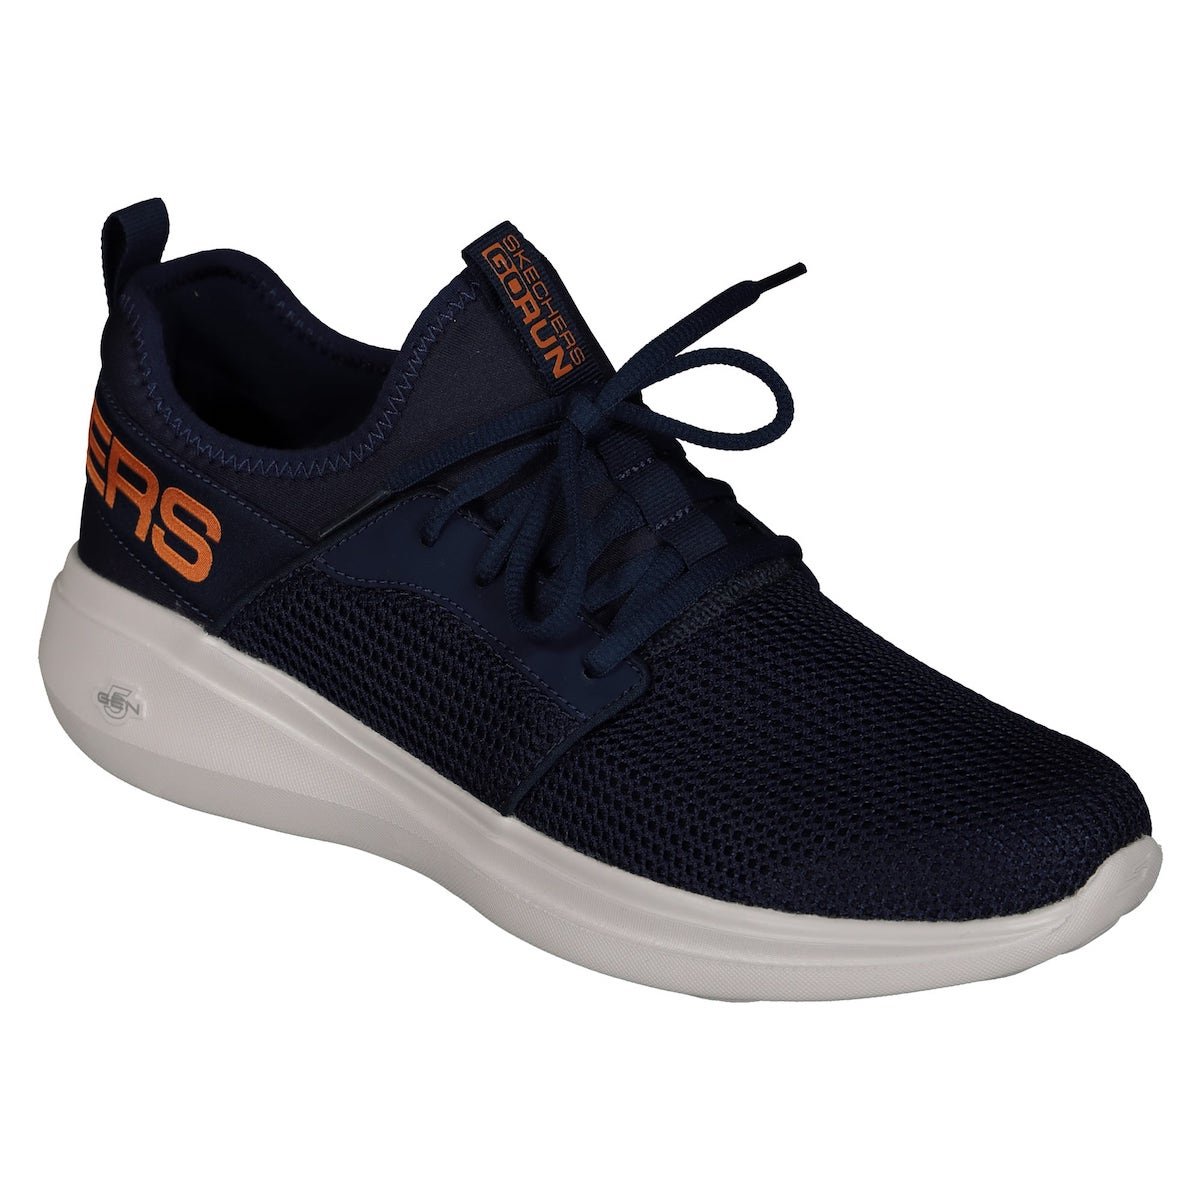 Skechers Mexico Facturacion, Buy Now, Hotsell,